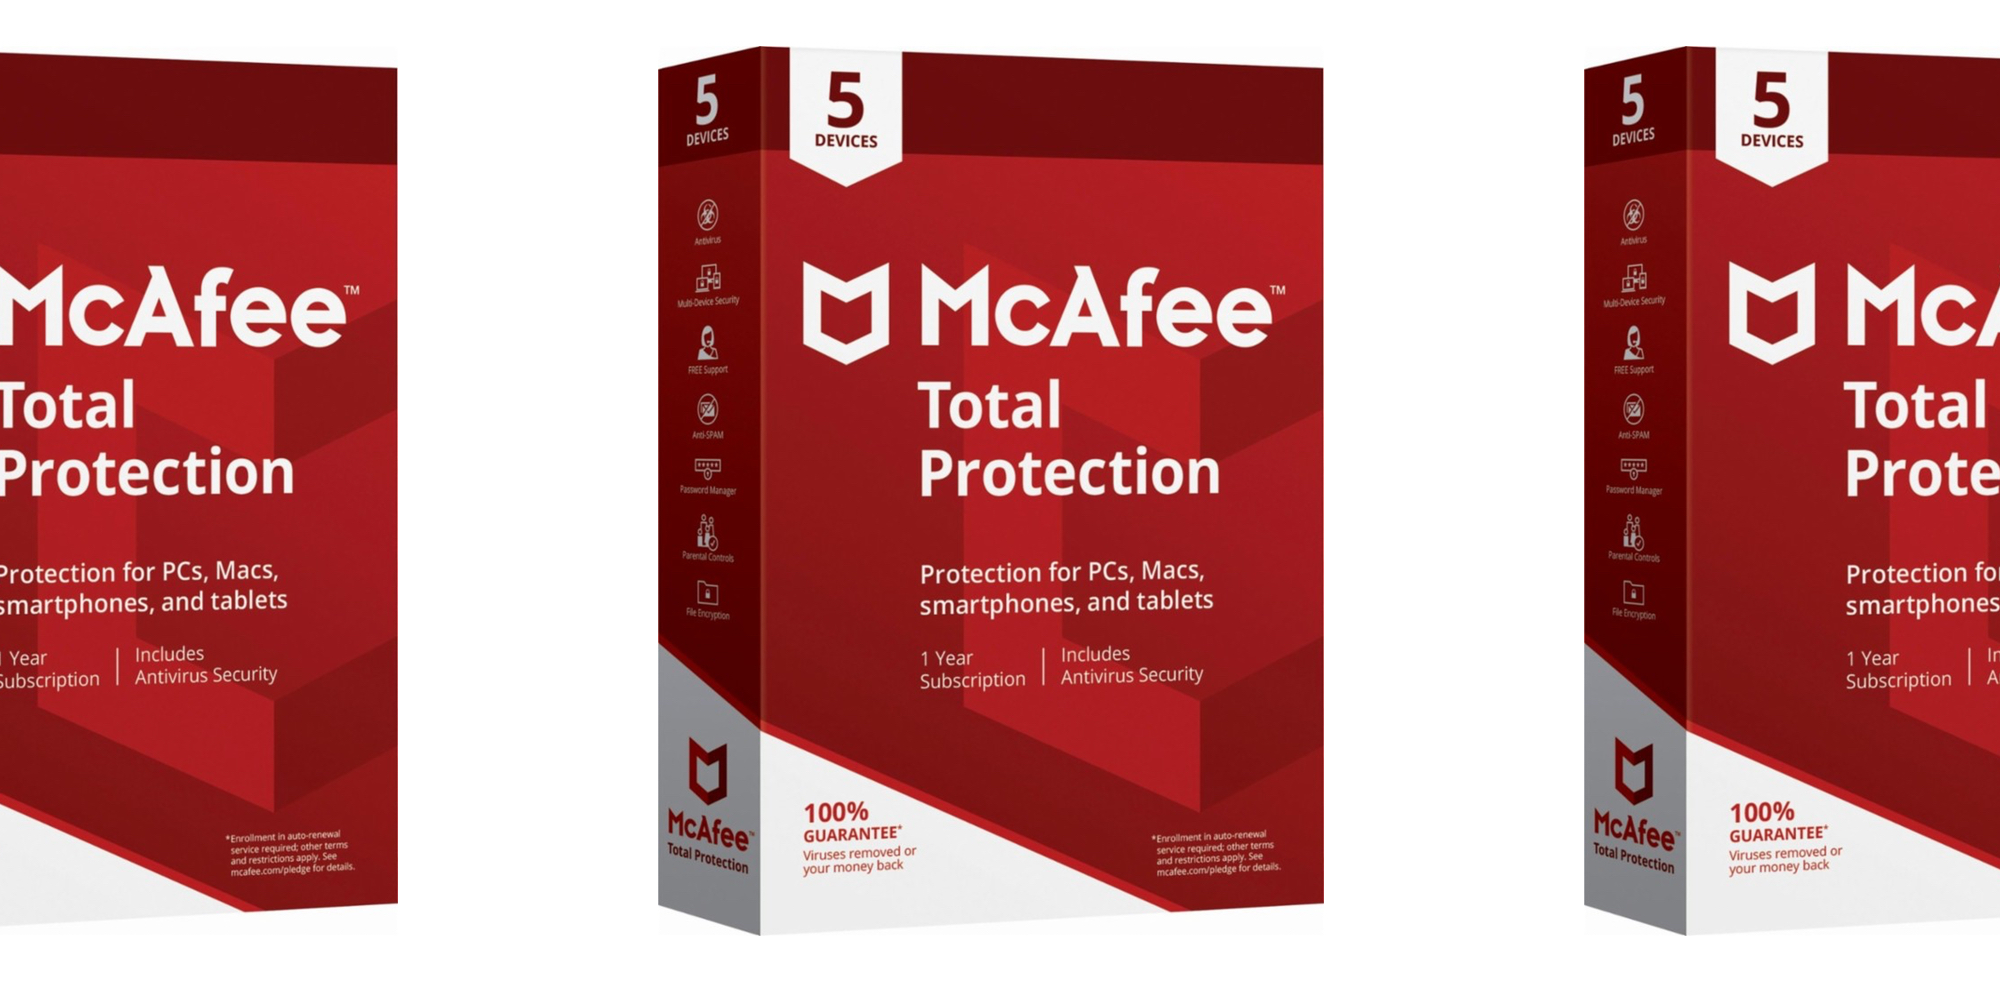 McAfee Total Protection defends against viruses & malware at new Amazon